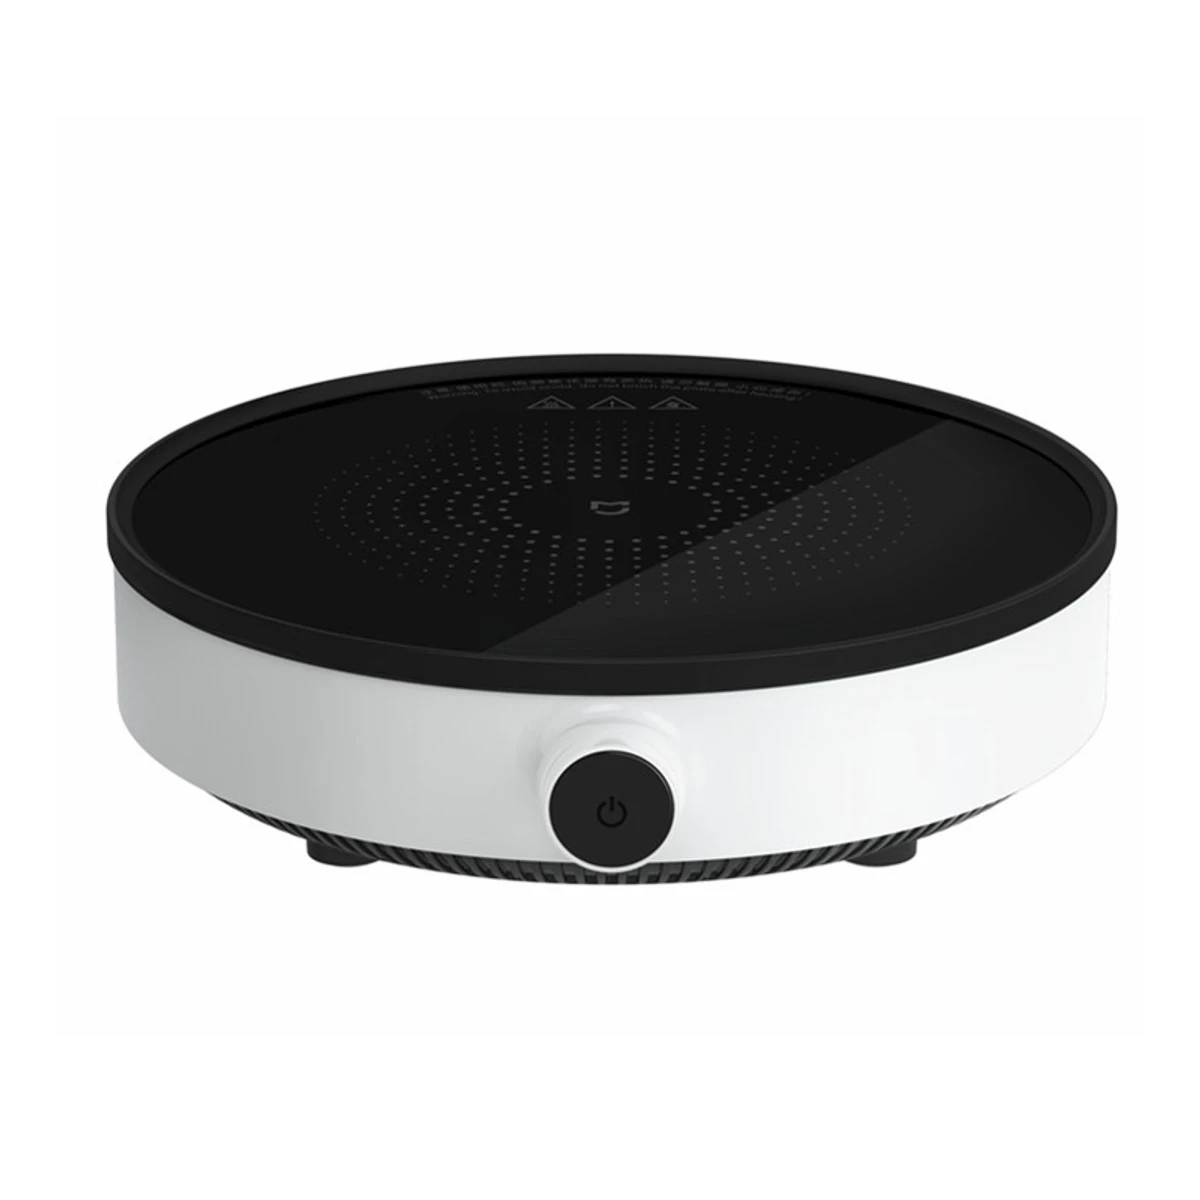 Xiaomi Mijia Induction Cooker Youth Edition